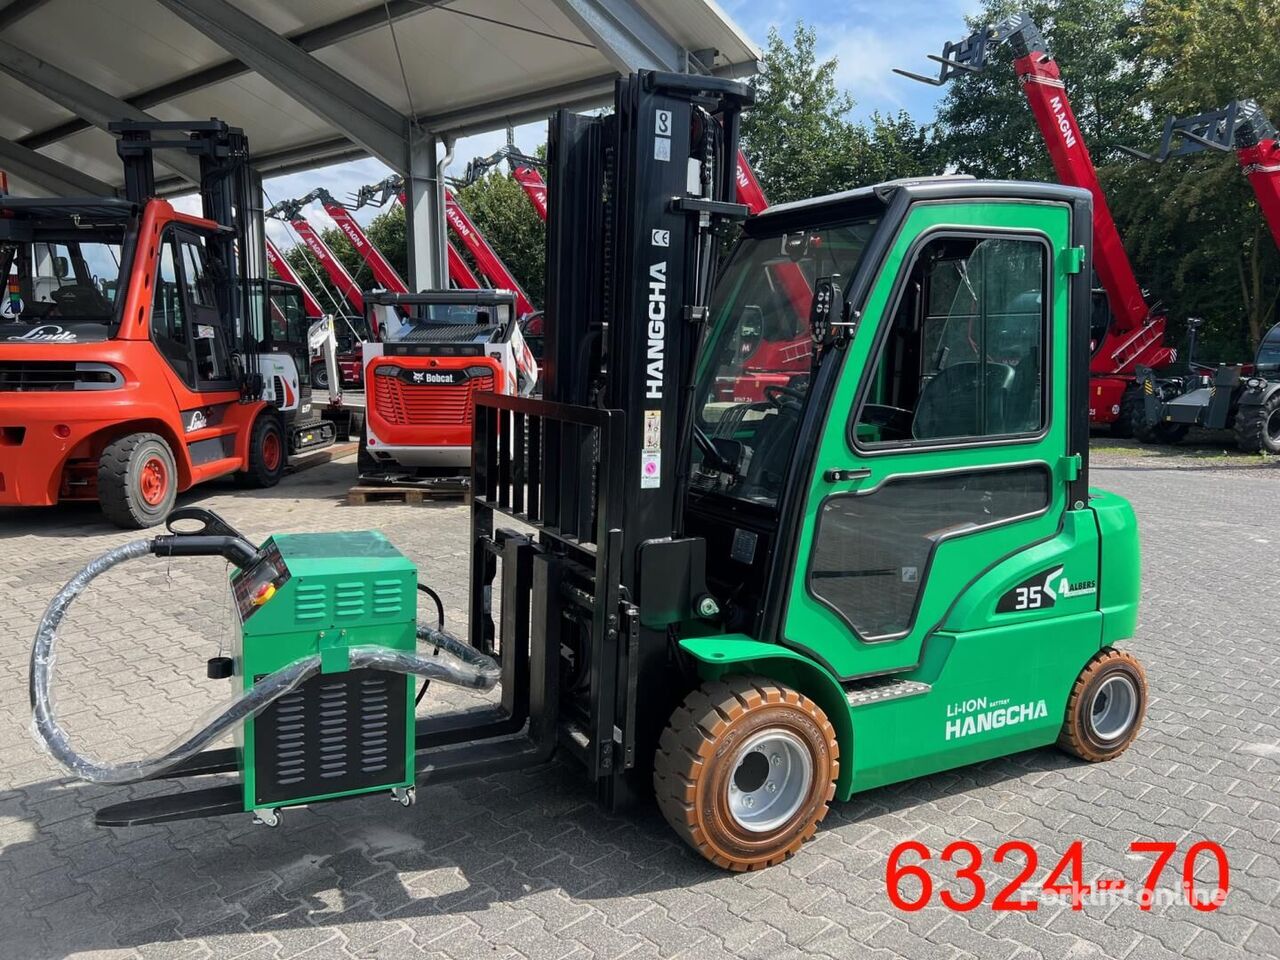 HC CPD 35 XD4 SI26 electric forklift